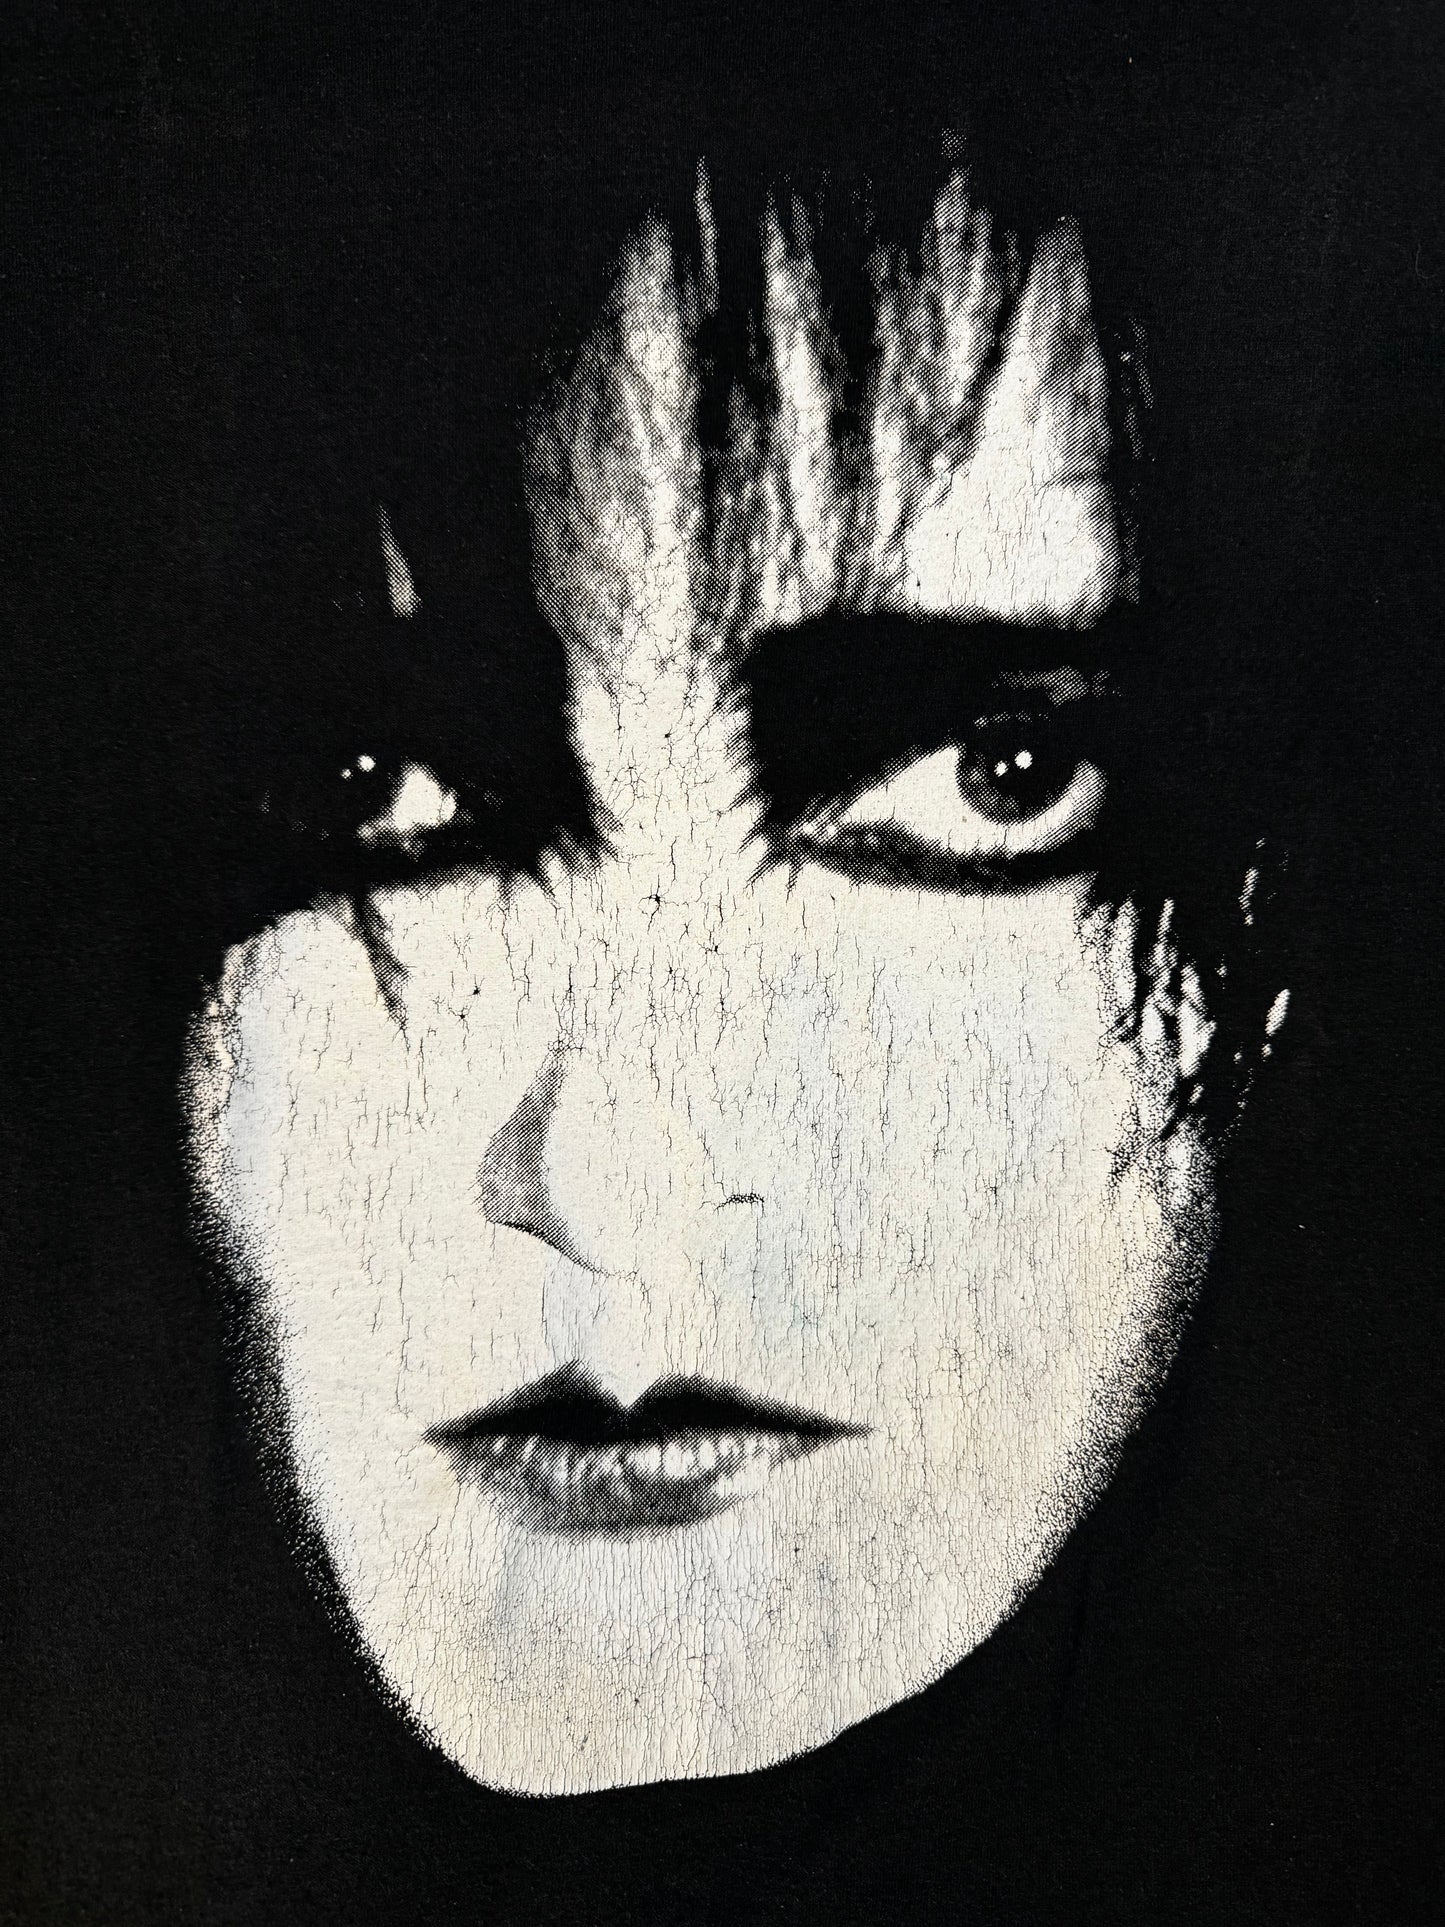 1980's Siouxsie And The Banshees Vintage T Shirt